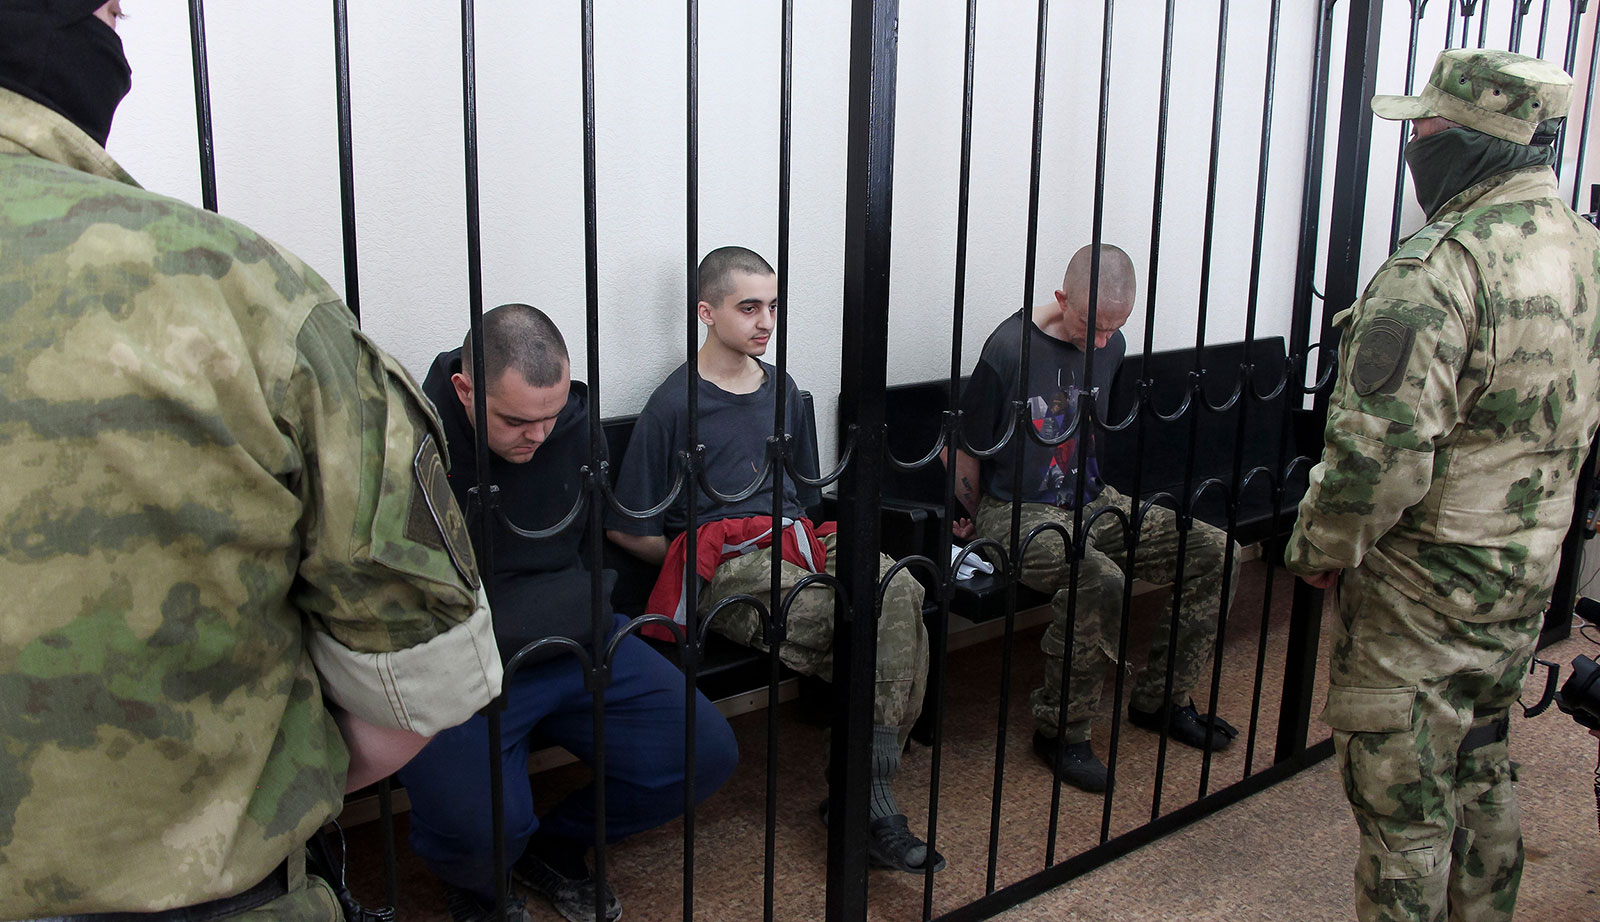 Two British citizens Aiden Aslin, left, and Shaun Pinner, right, and Moroccan Brahim Saadoune, center, sit behind bars in a courtroom in Donetsk, in the territory which is under the Government of the Donetsk People's Republic control, eastern Ukraine, on June 9.